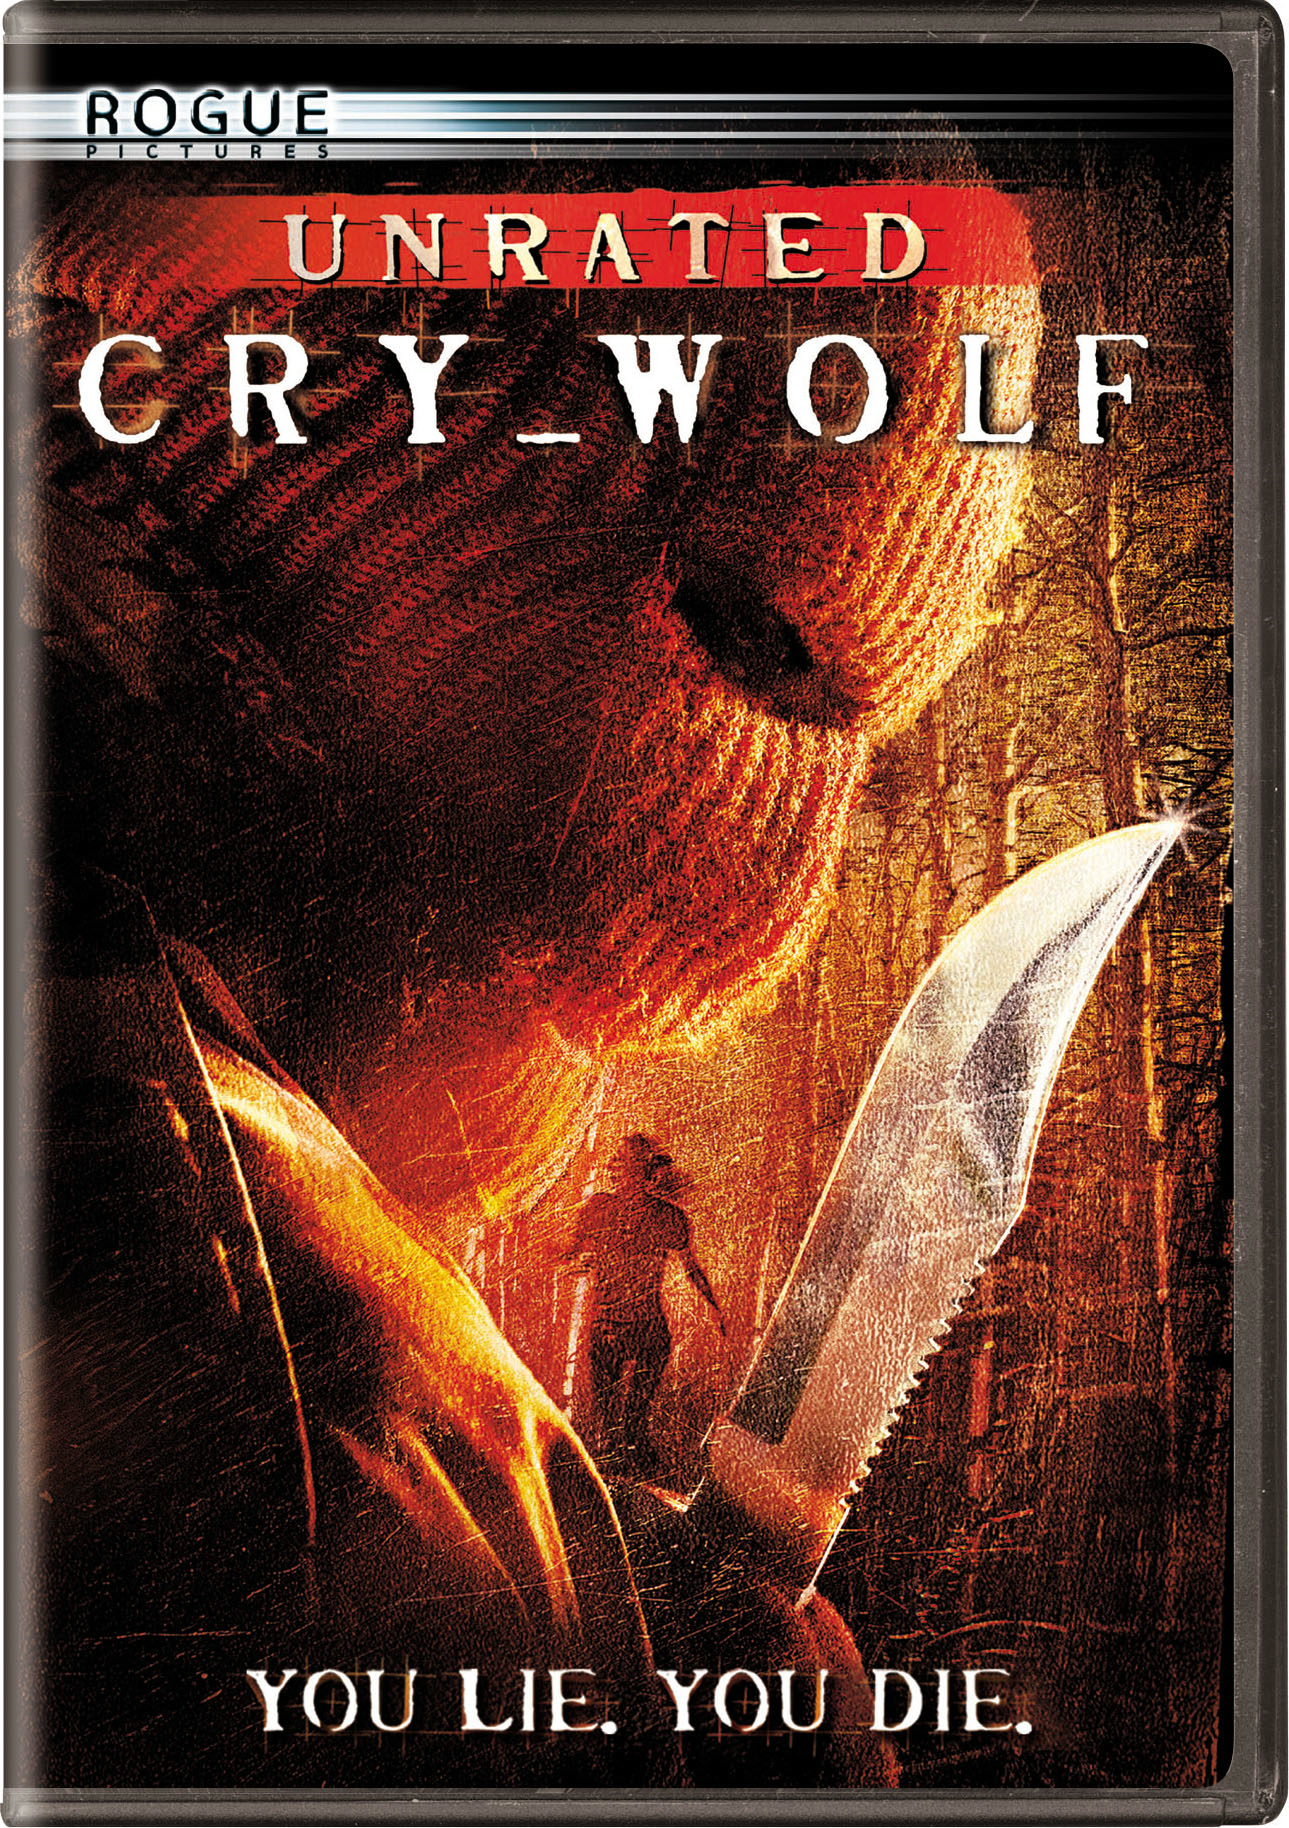 Cry Wolf (DVD Widescreen Unrated) - DVD [ 2005 ]  - Horror Movies On DVD - Movies On GRUV